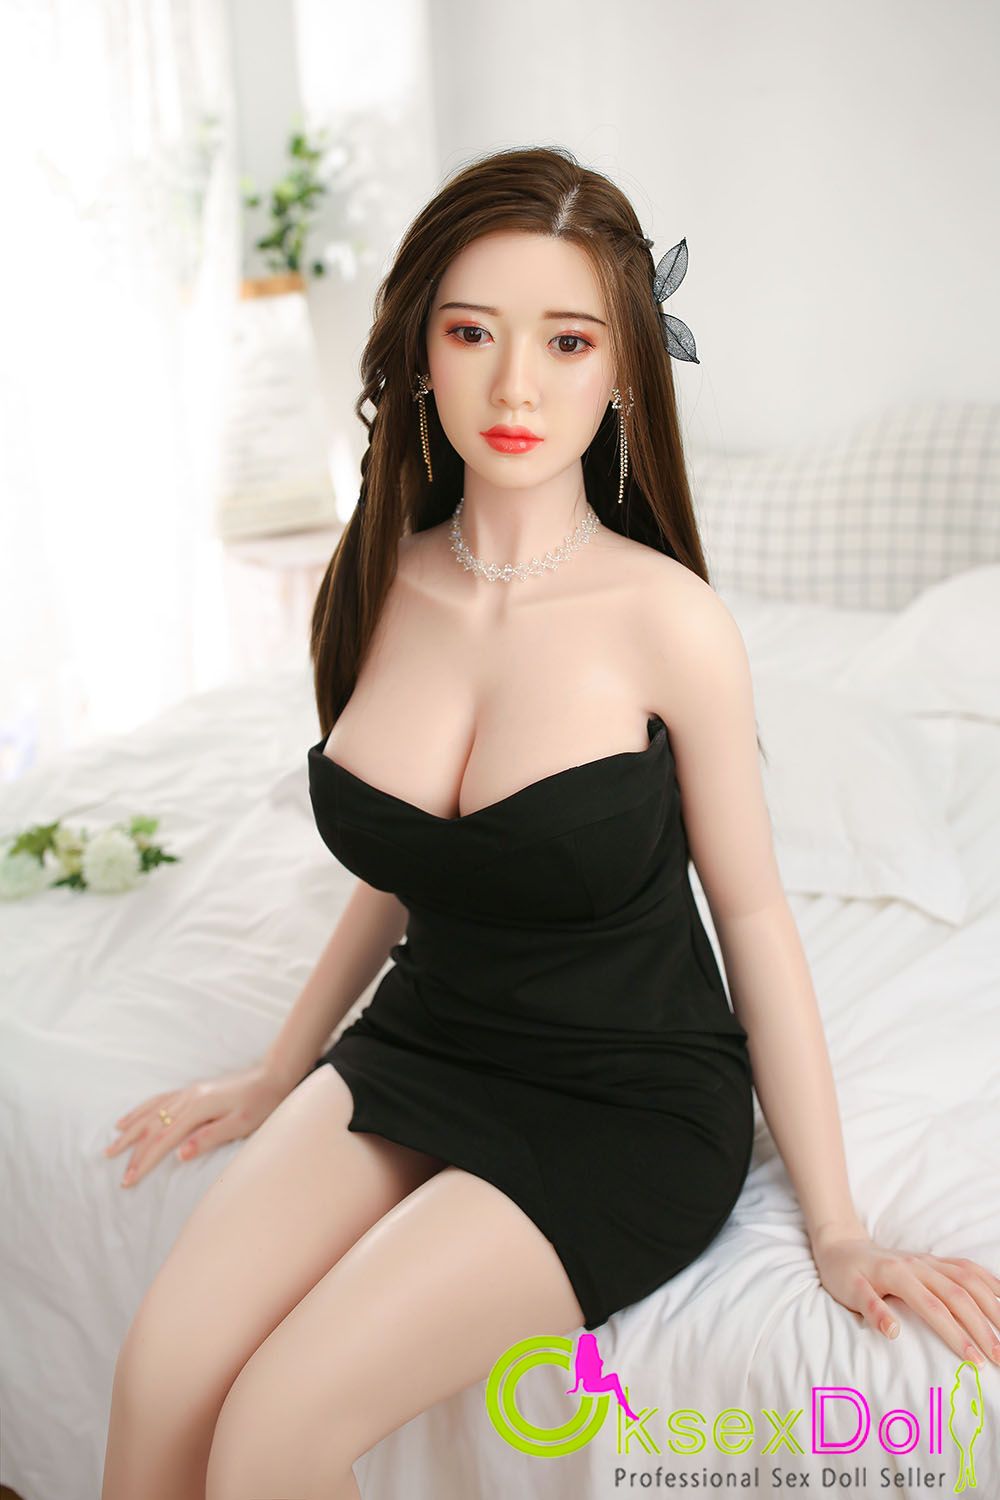 Busty Breast Silicone Real Love Doll Photos